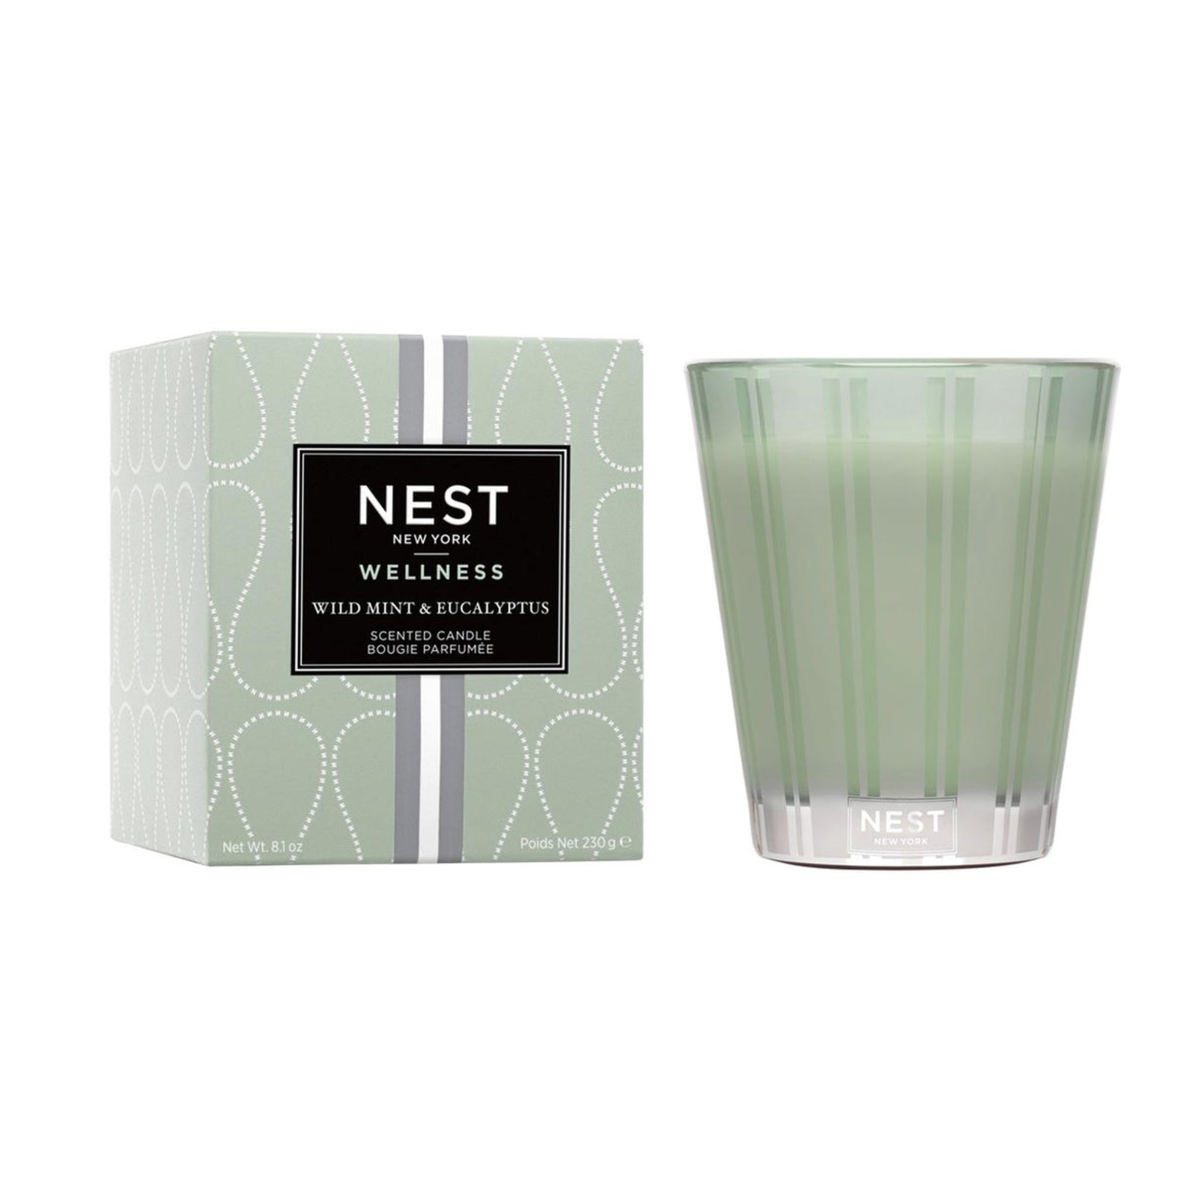 Product Image of Nest New York’s Wild Mint &amp; Eucalyptus Classic Candle with Box